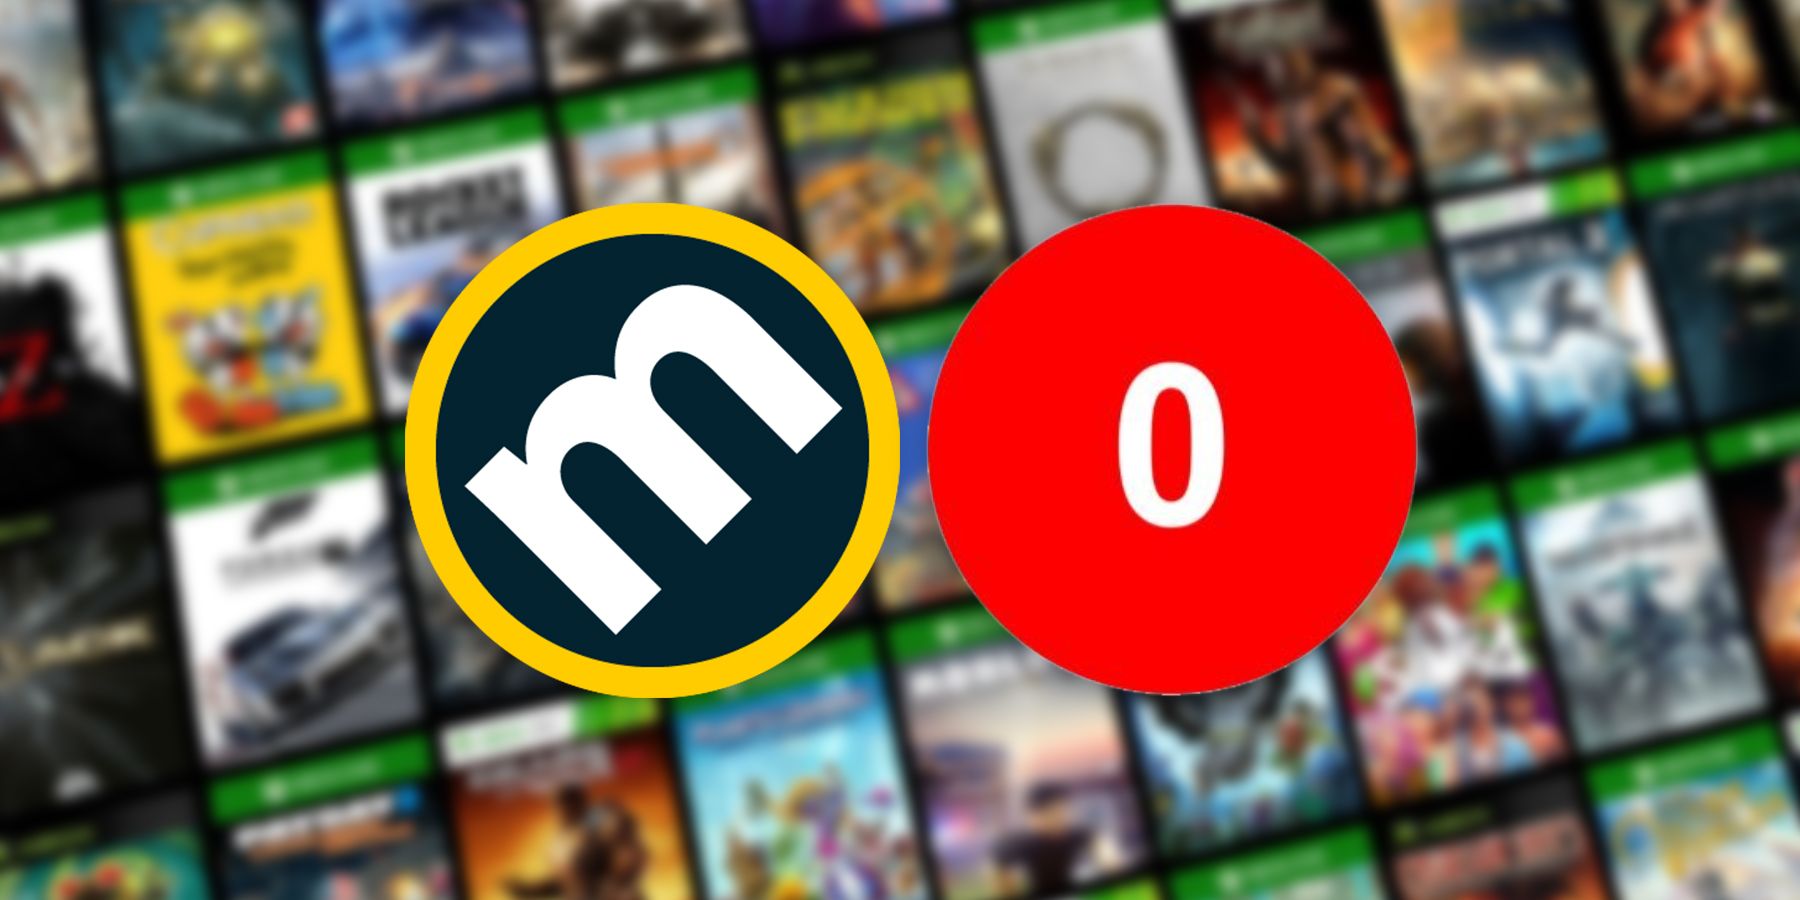 xbox-exclusives-review-bombed-metacritic